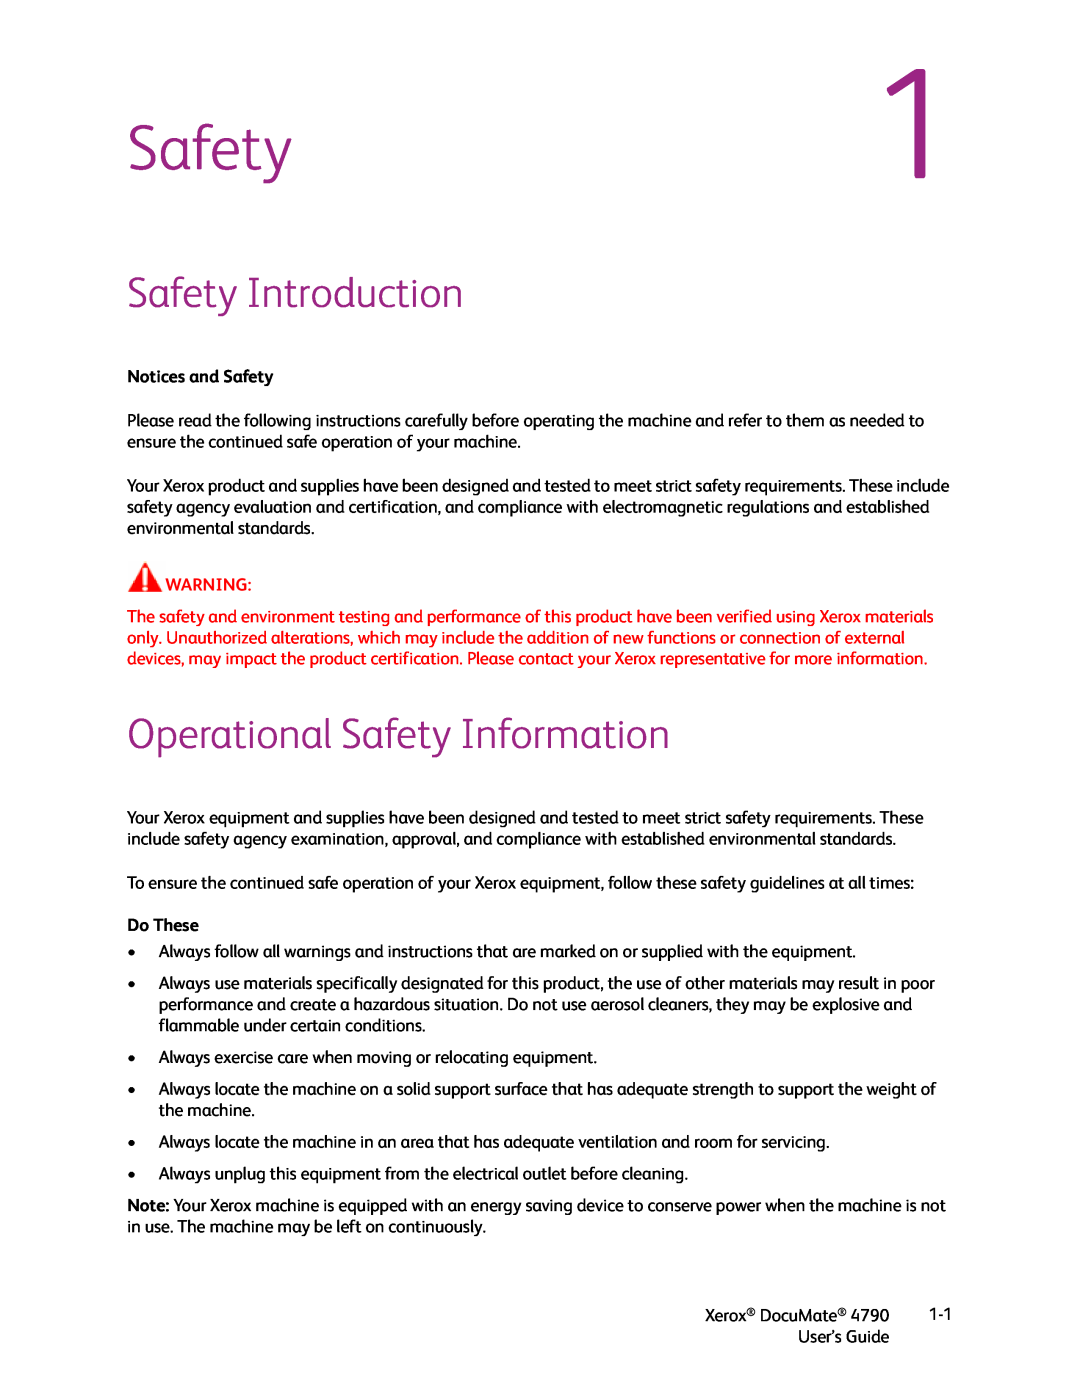 Xerox xerox documate manual Safety Introduction, Operational Safety Information, Notices and Safety, Do These 